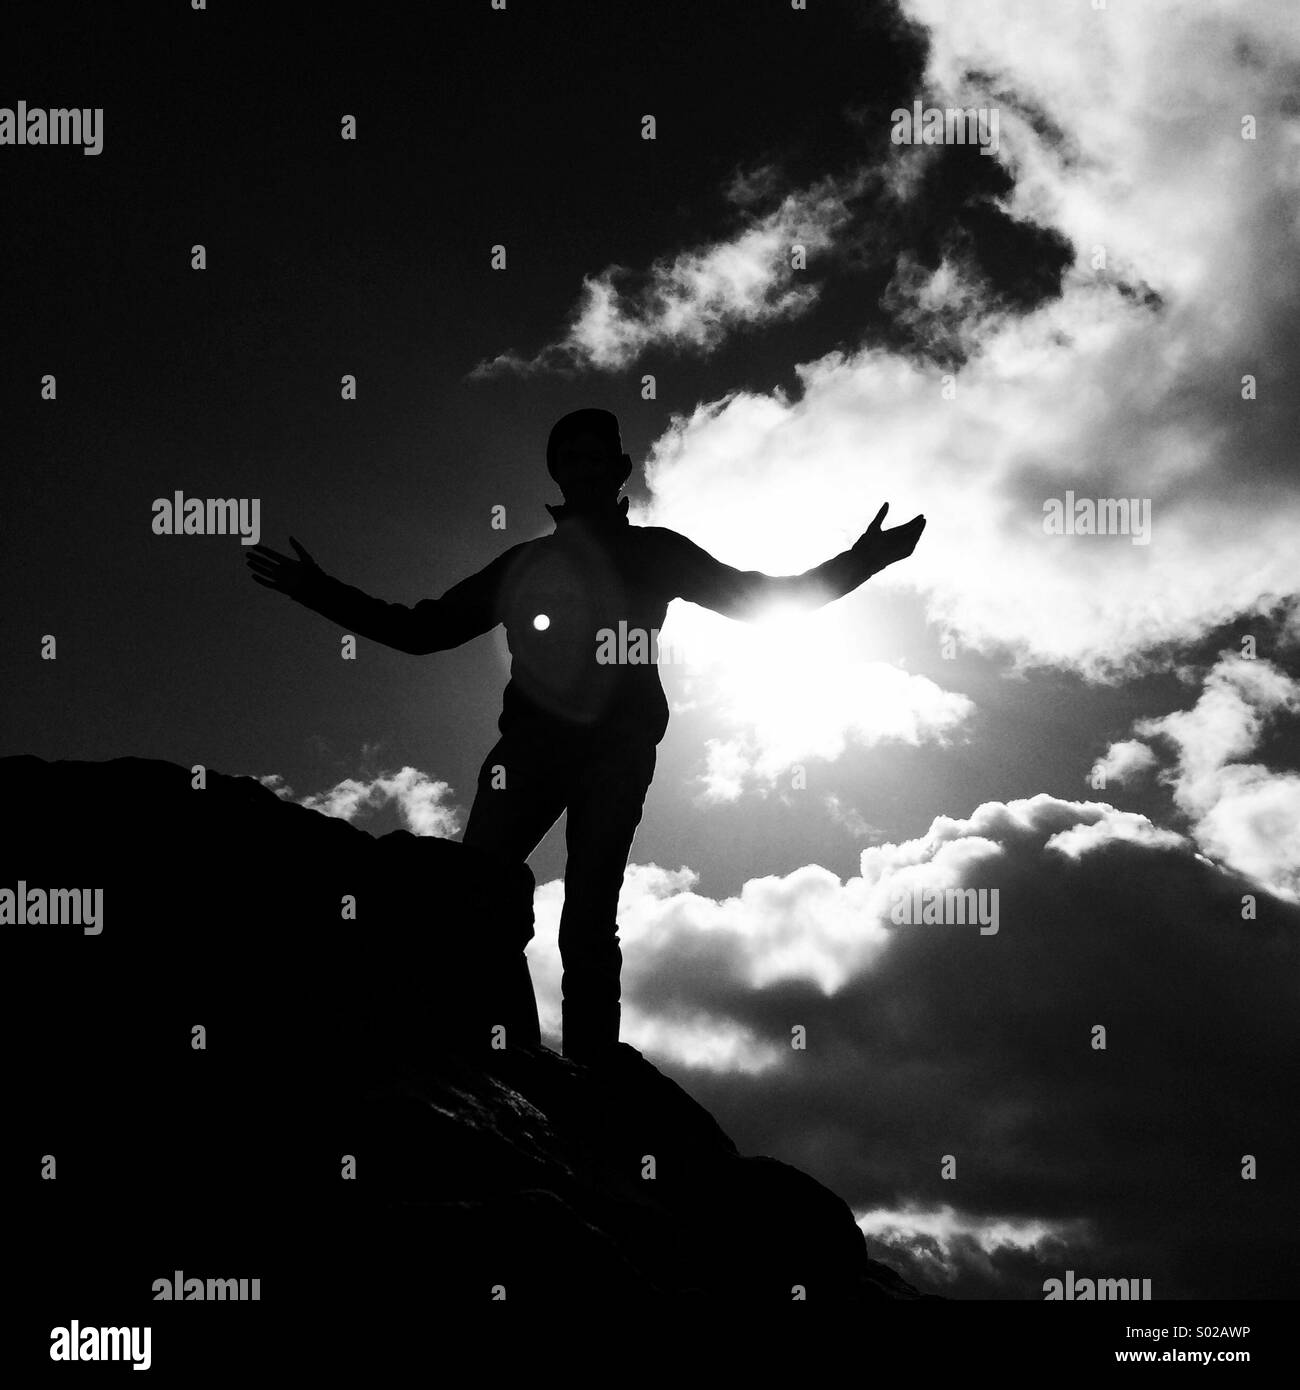 Silhouette of man on rock Stock Photo